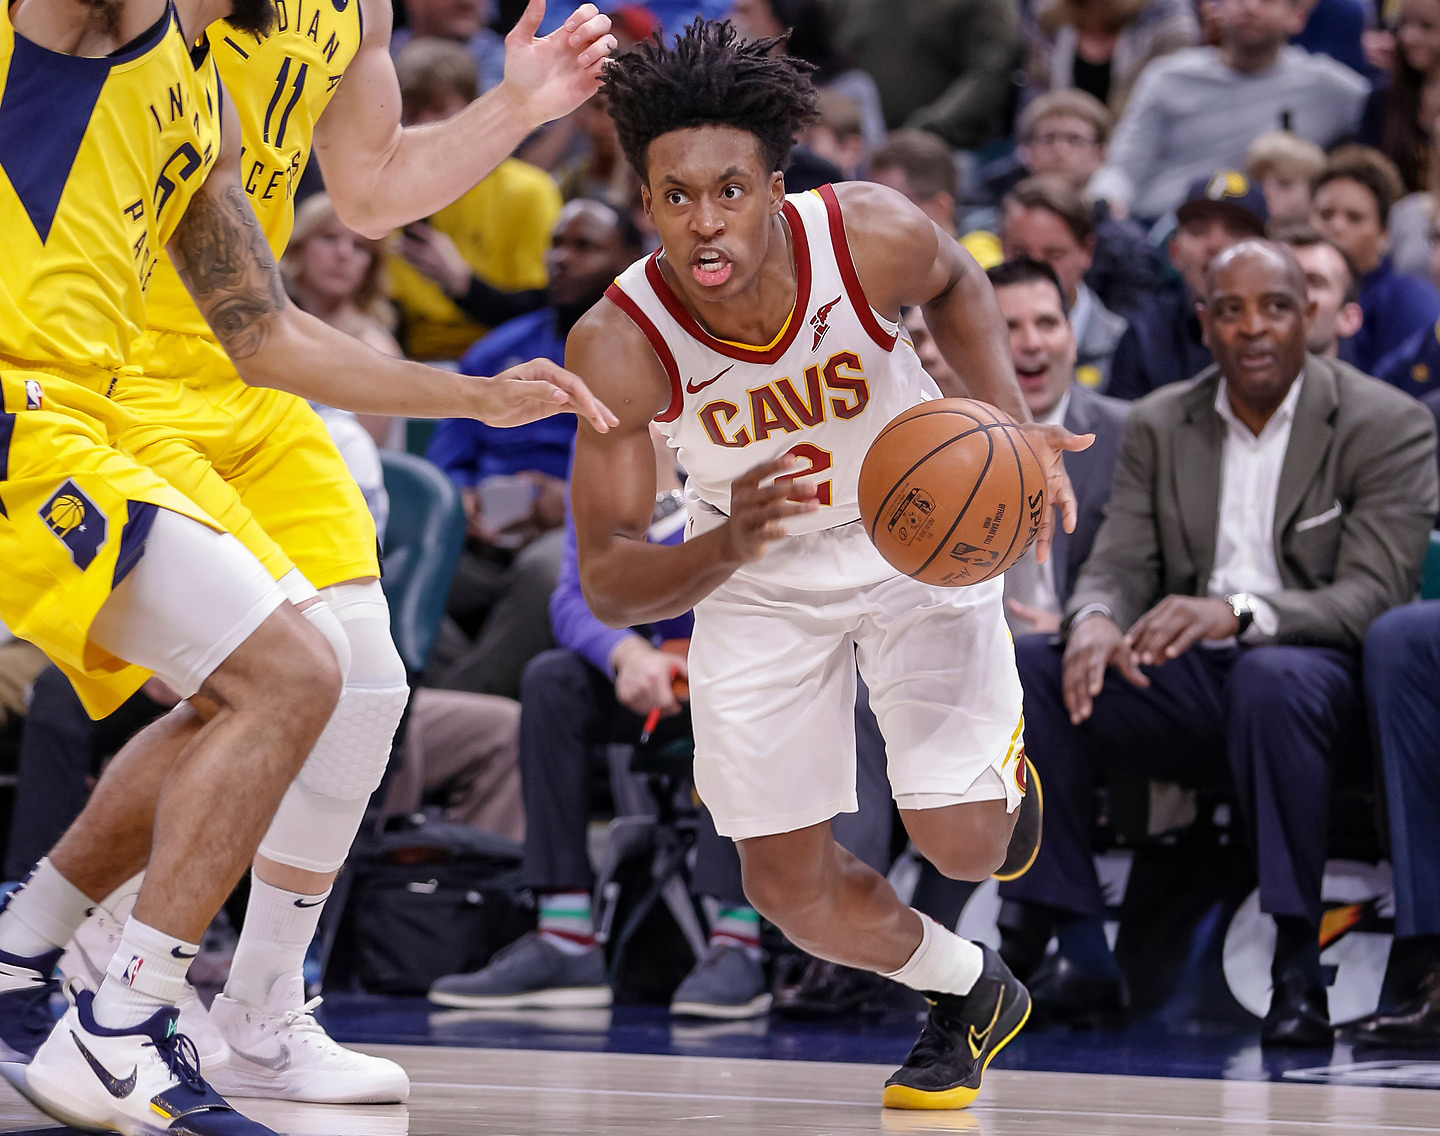 Sexton faces injury layoff for Cavs